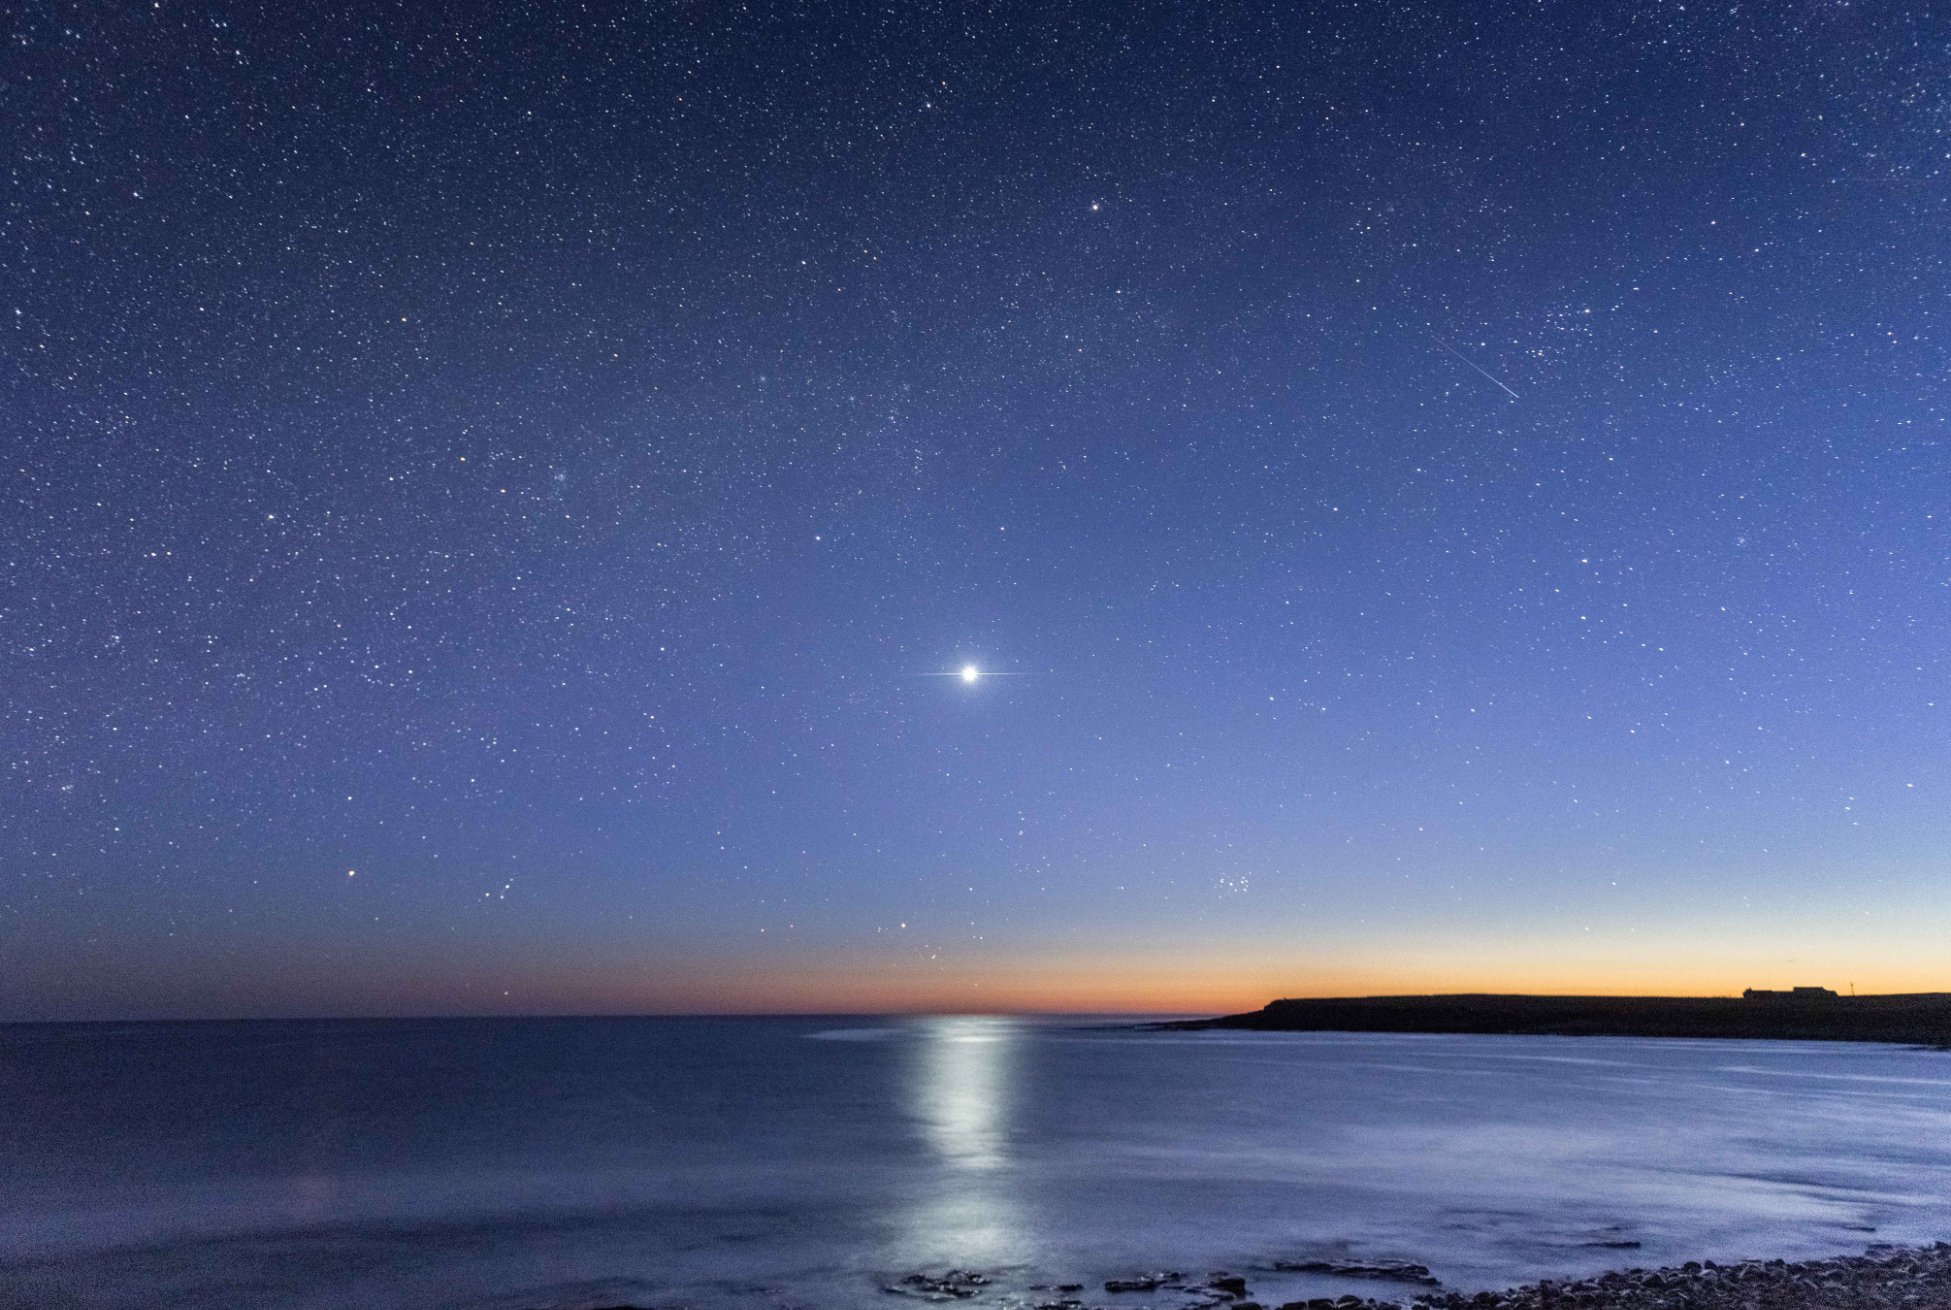 Venus in the Orkney night sky - image by Raymond Besant